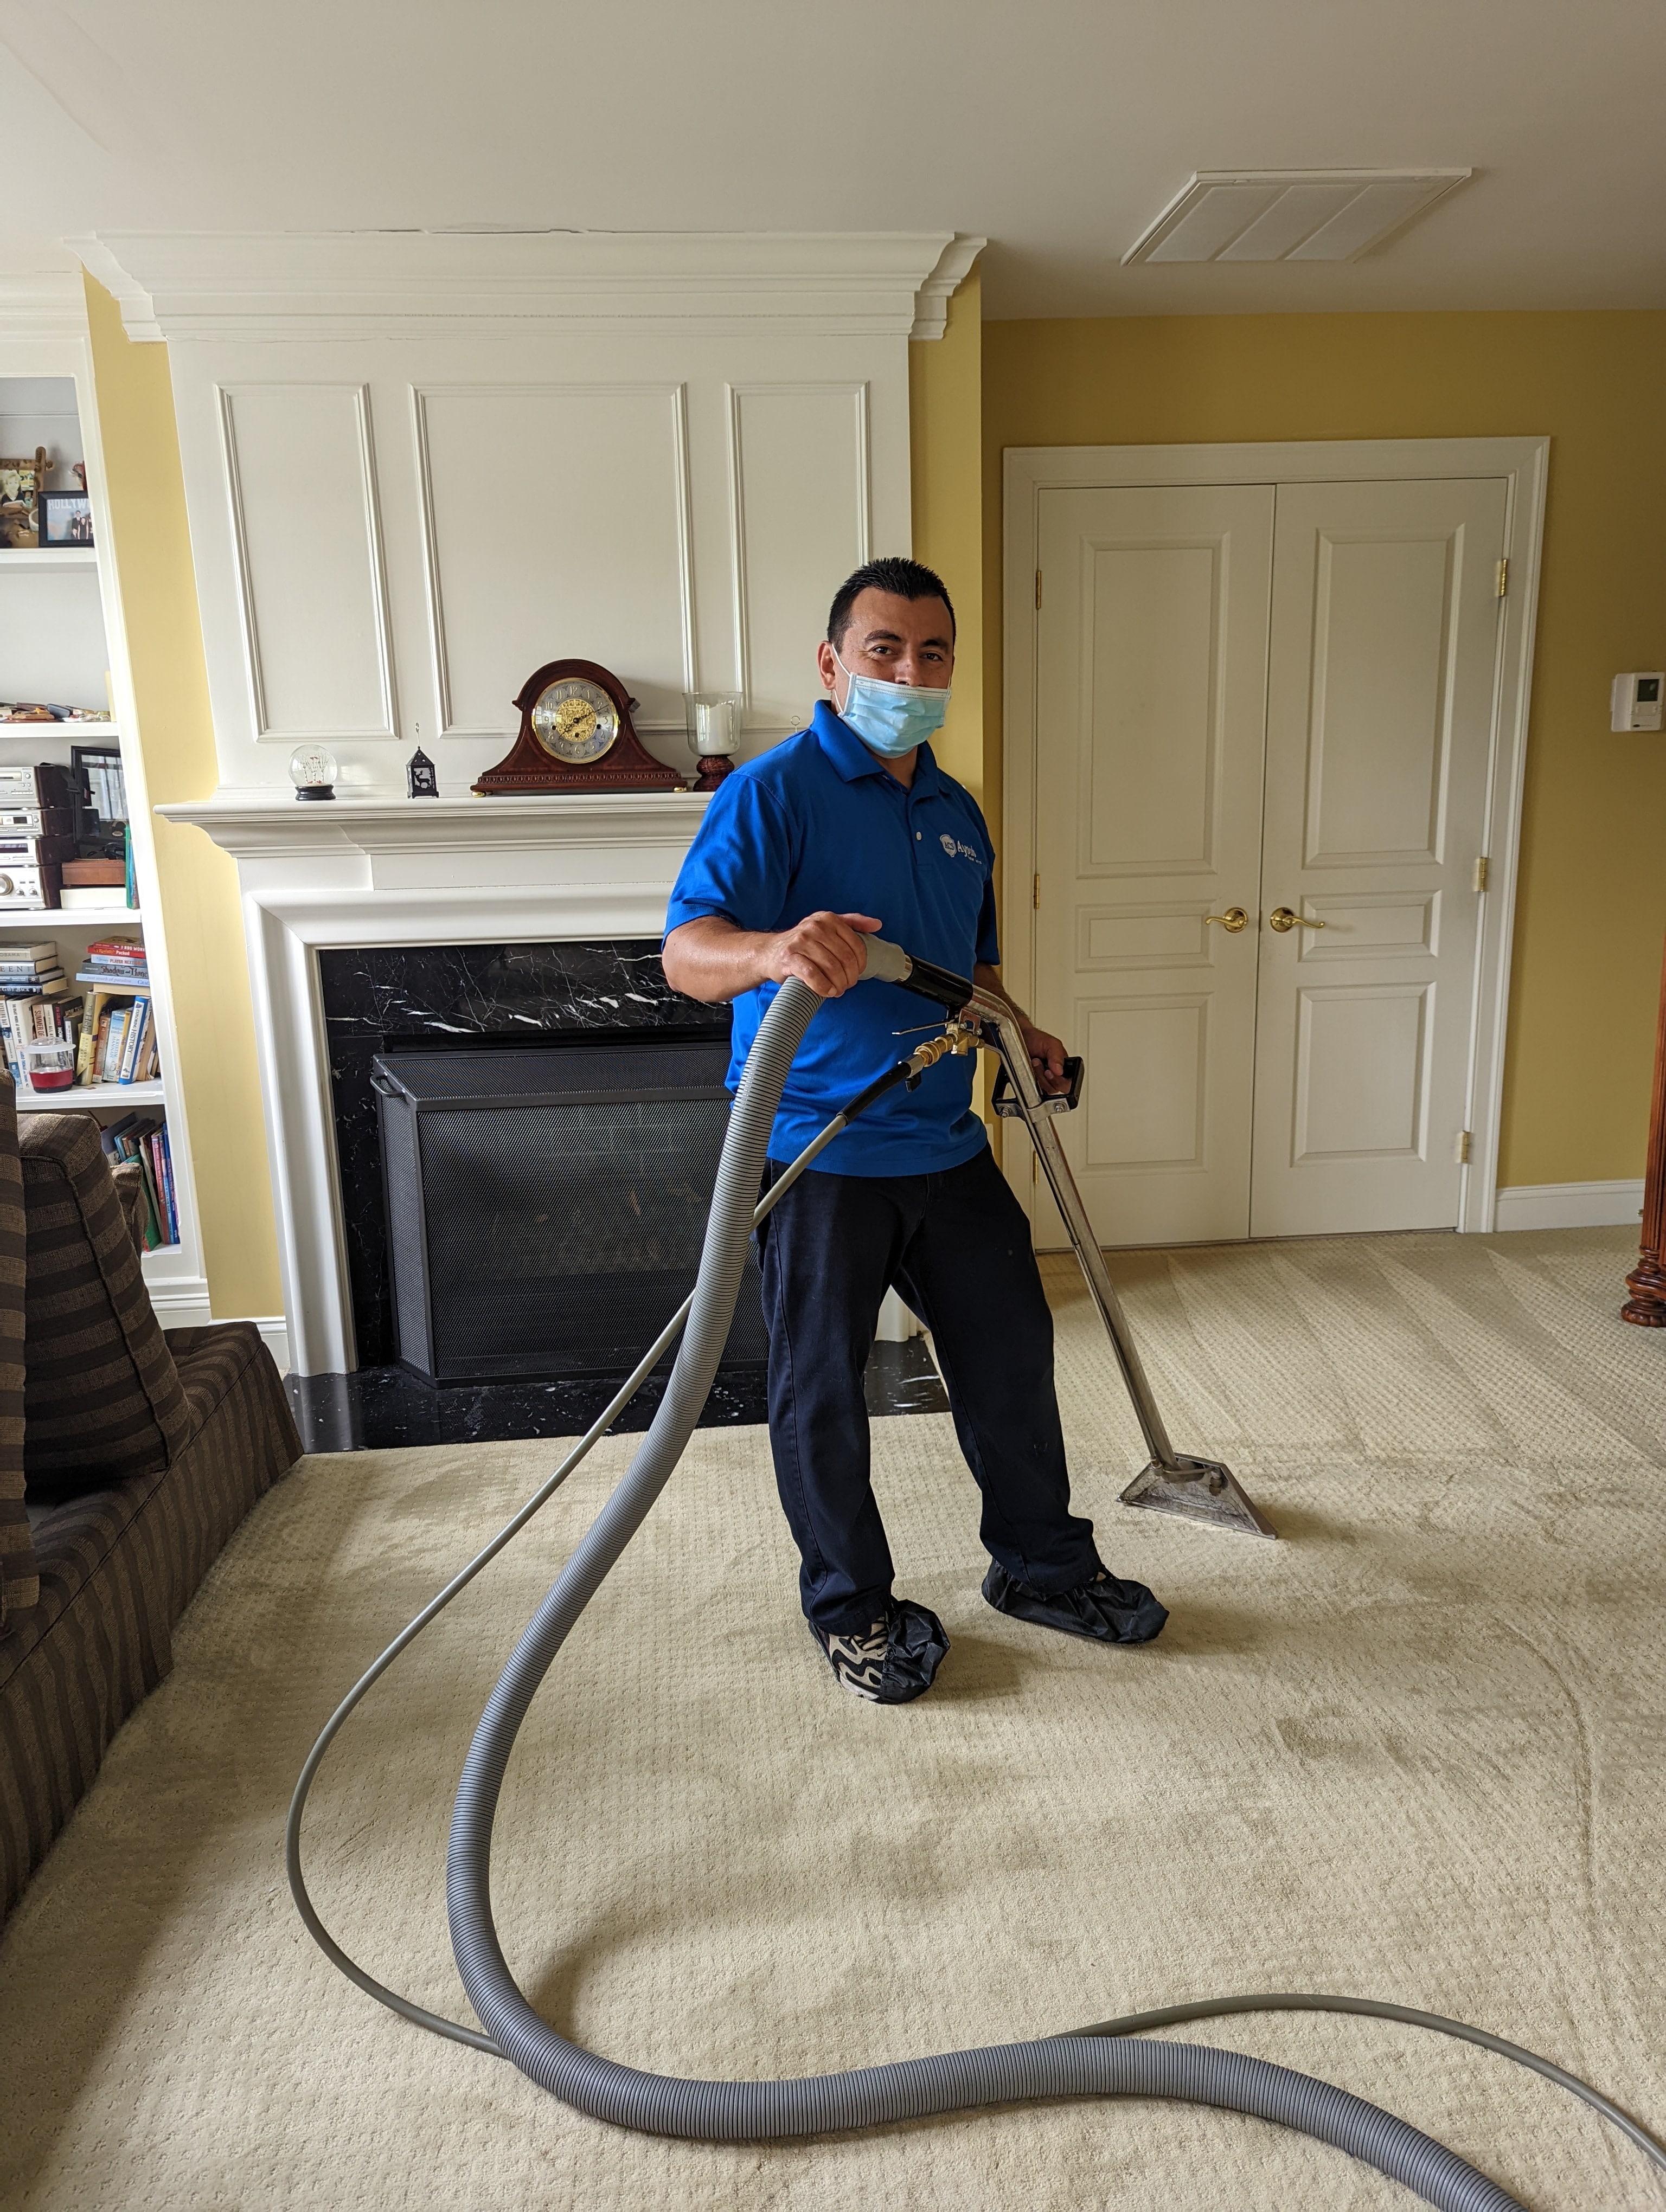 Winter Refresh: The Ideal Season for Rug and Carpet Cleaning